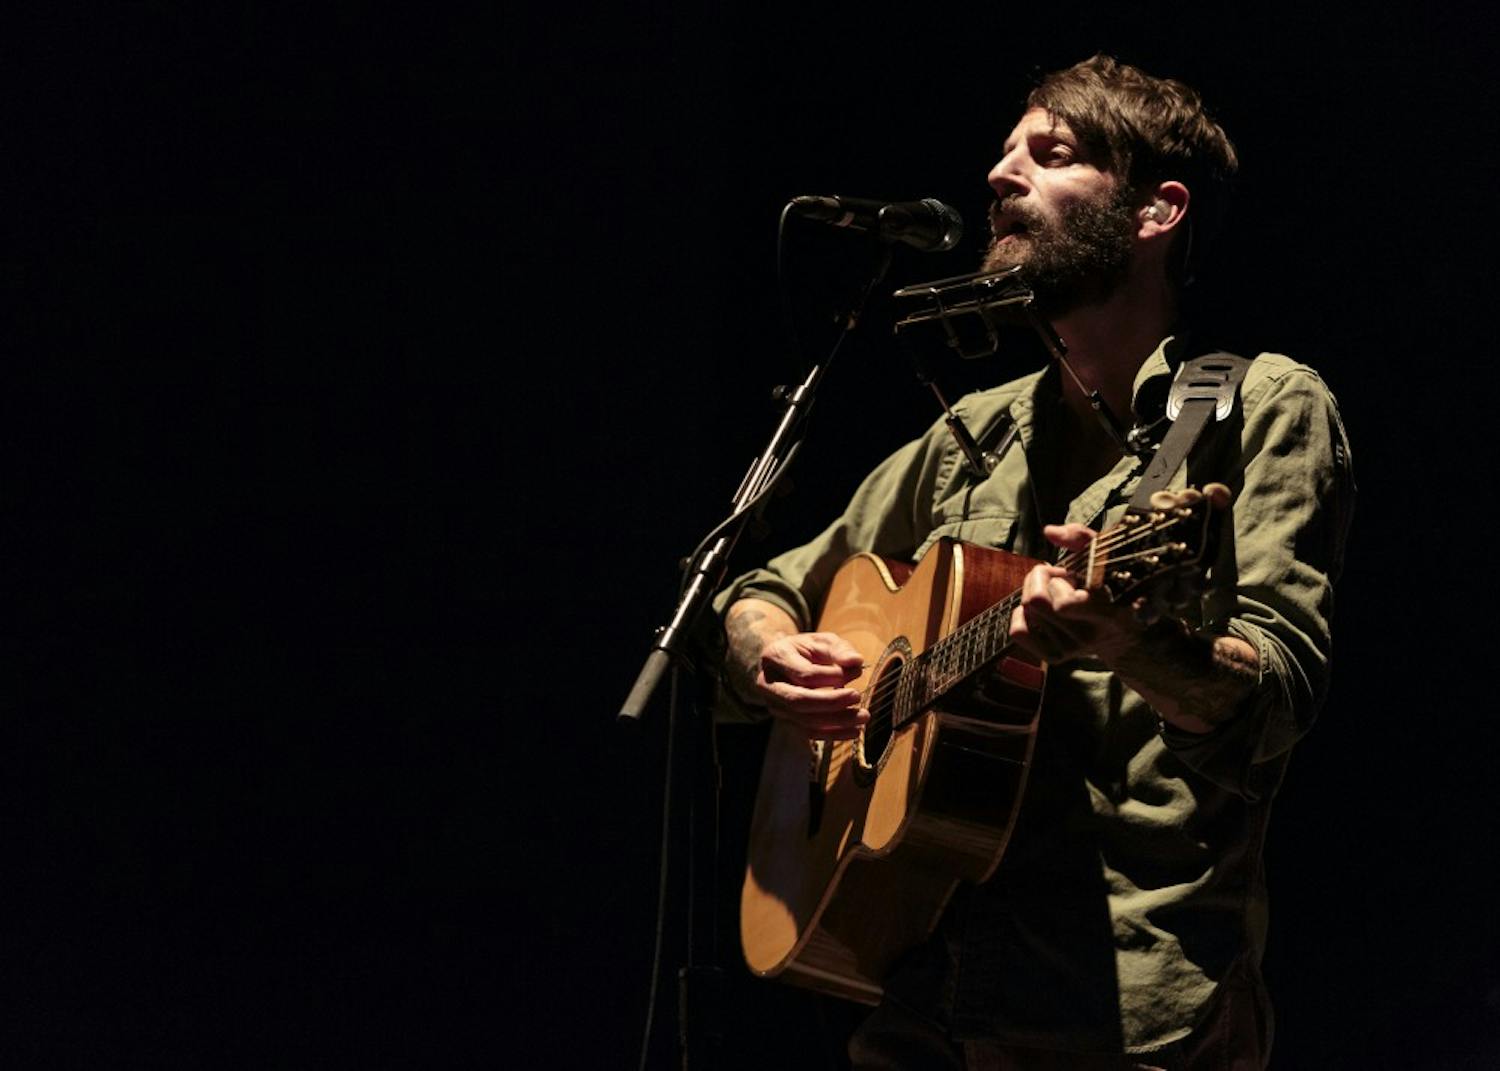 Grammy Award-winning singer/songwriter Ray LaMontagne will return to the stage with his Just Passing Through acoustic tour on Nov. 4 at the IU Auditorium. LaMontagne last went on tour five years ago.